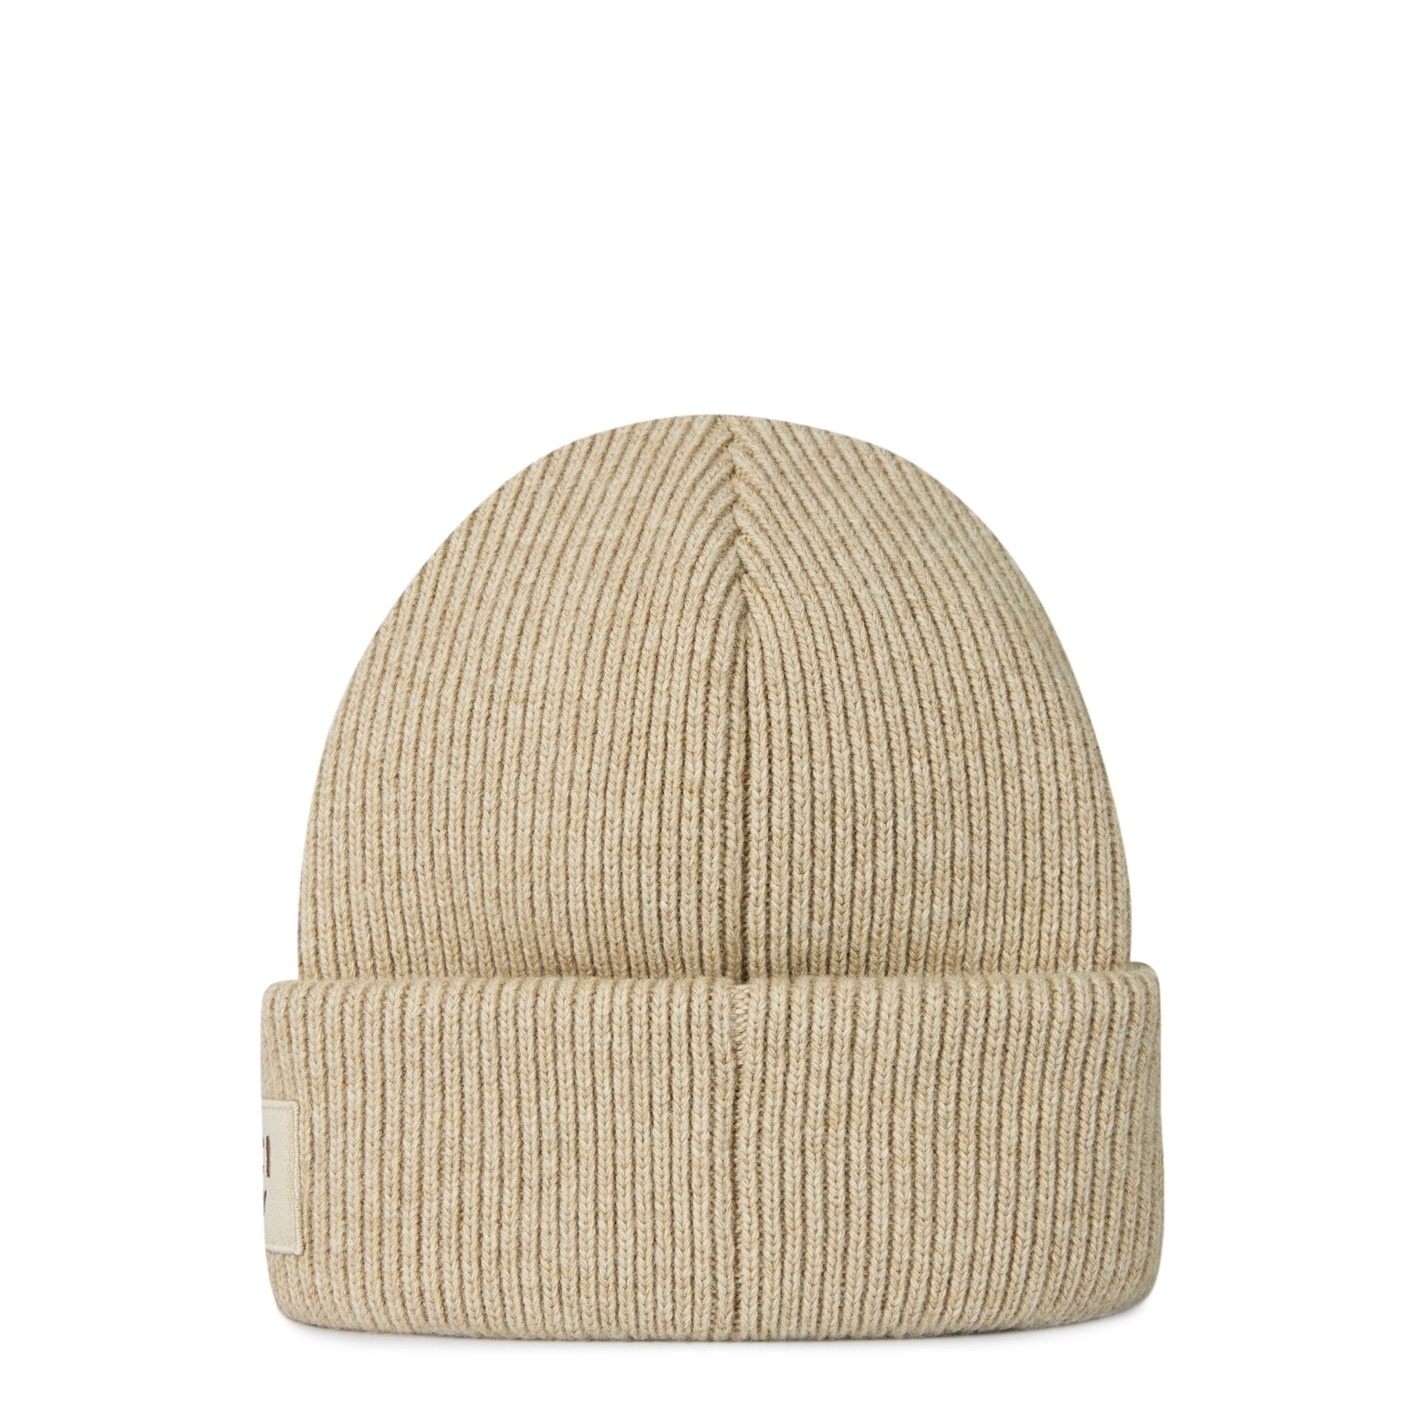 KNIT WOOL HAT WITH PATCH - 4